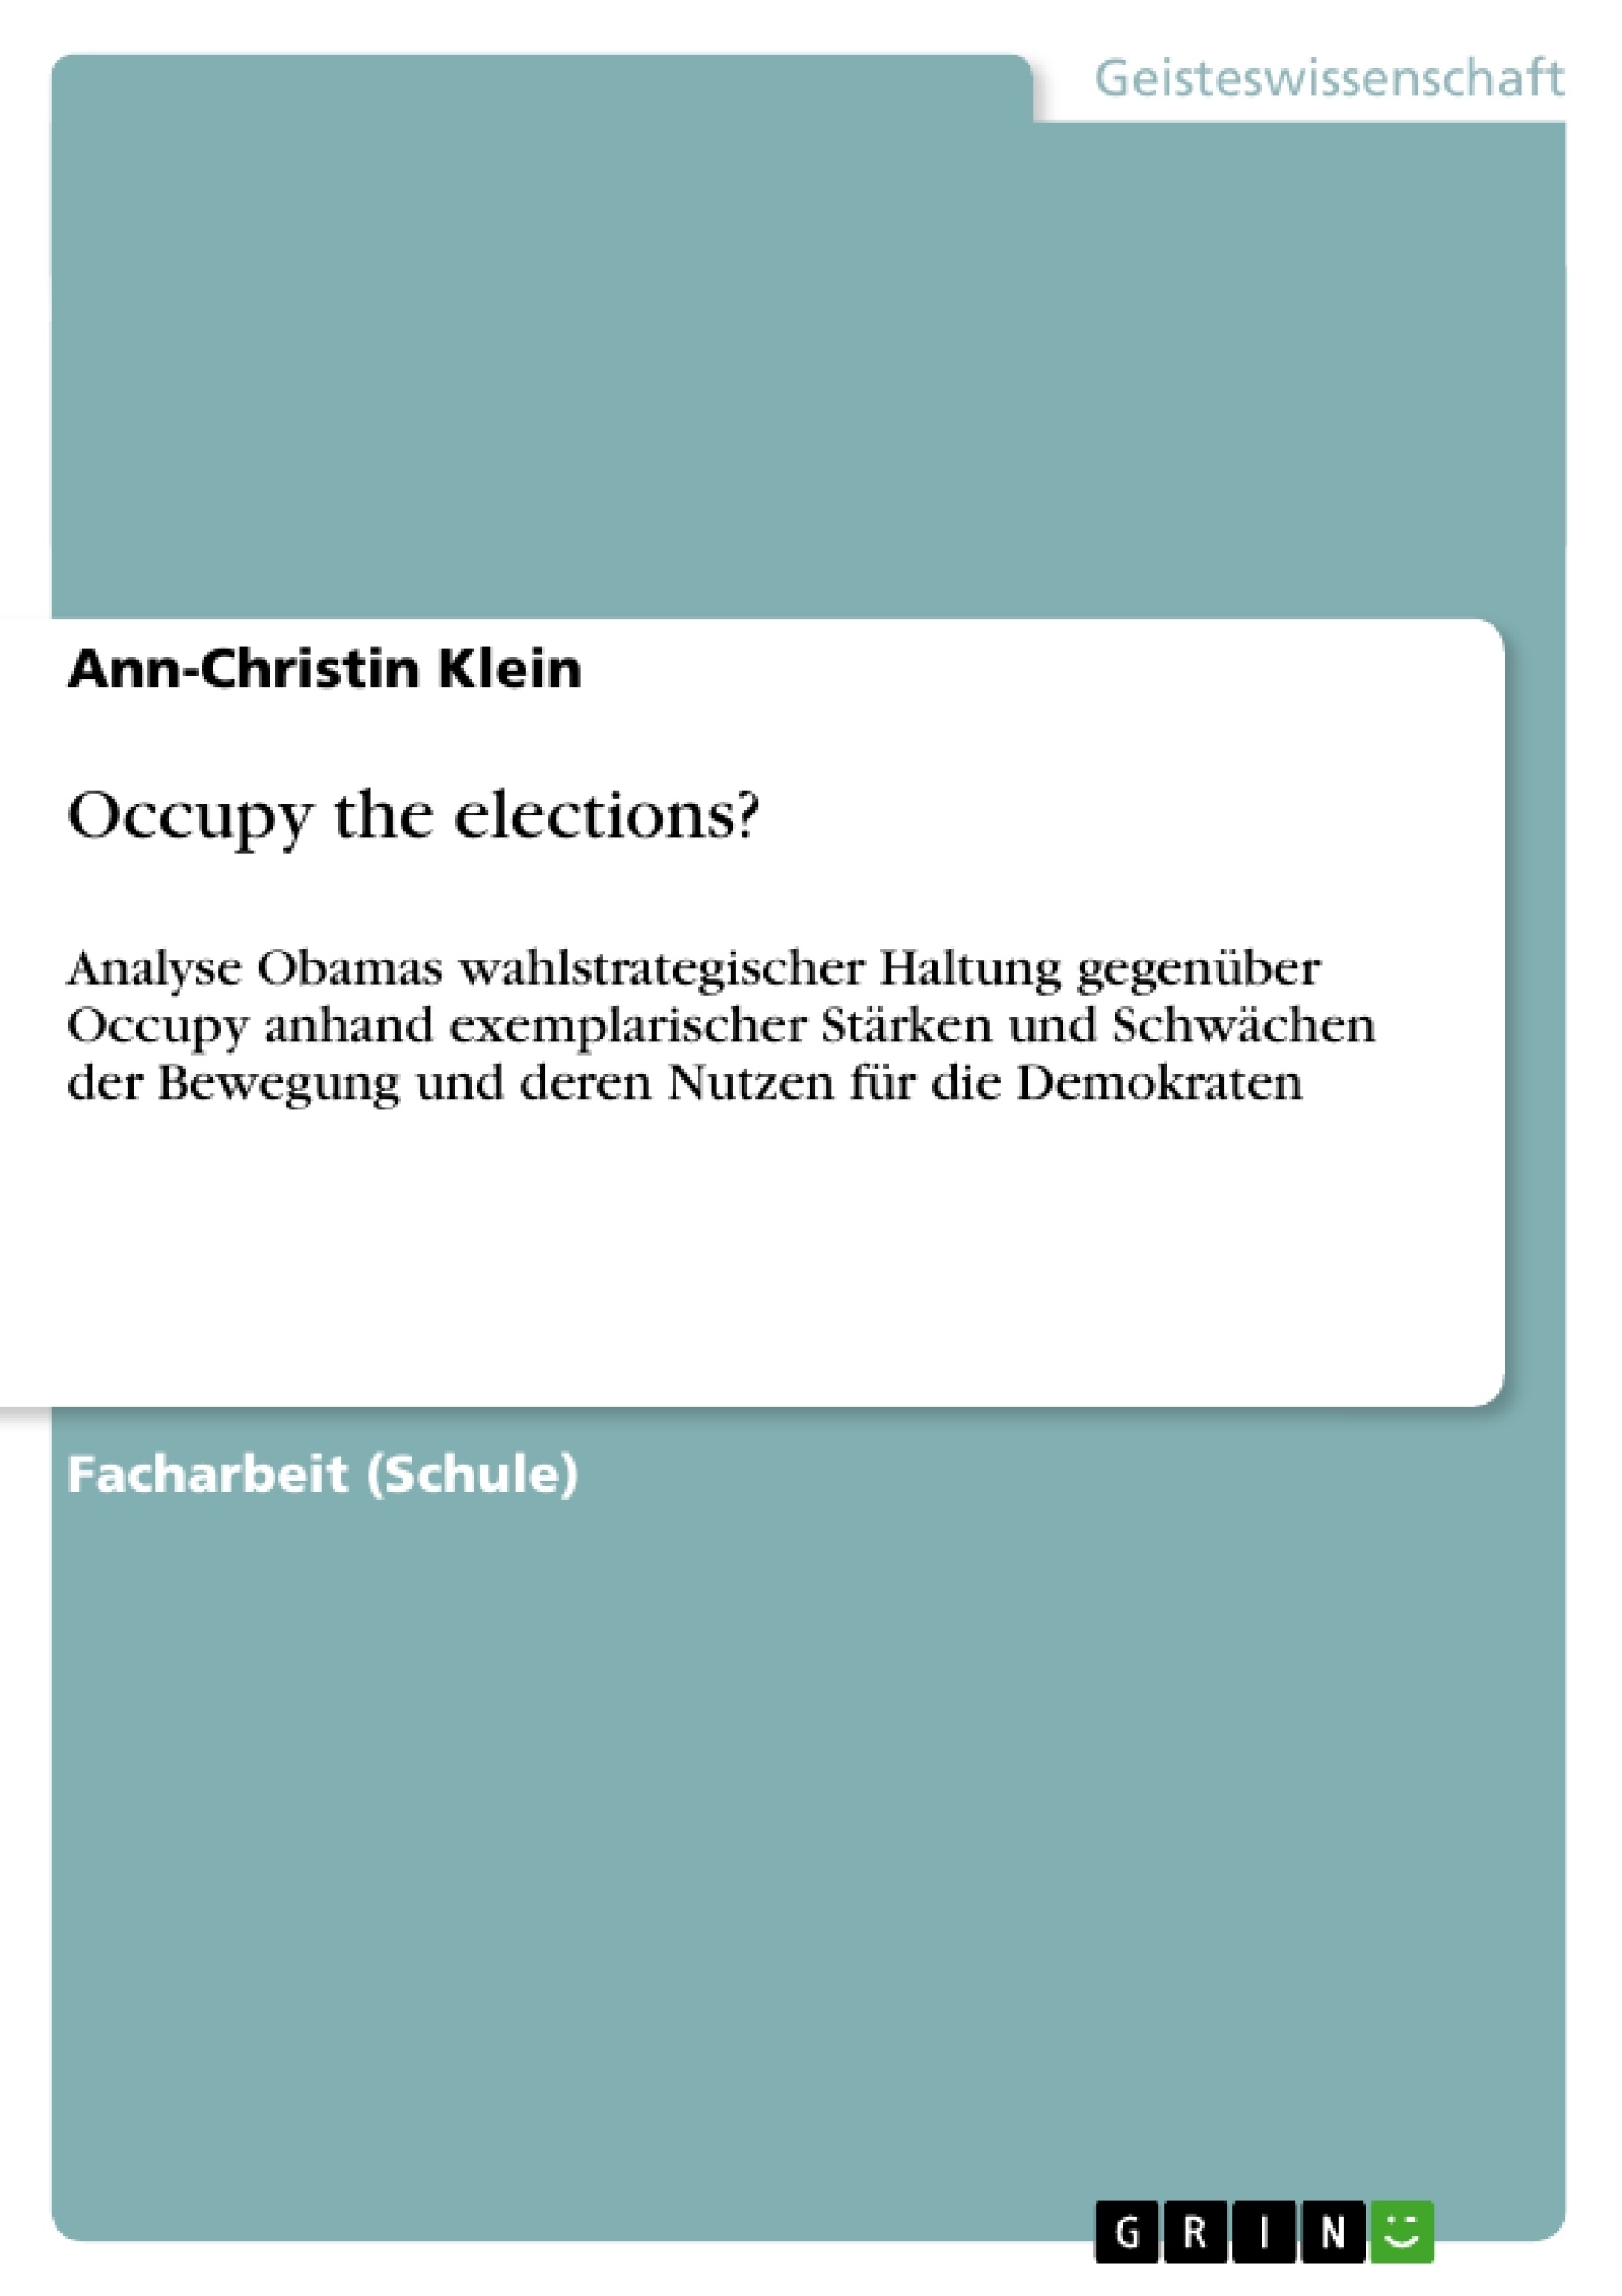 Titel: Occupy the elections?